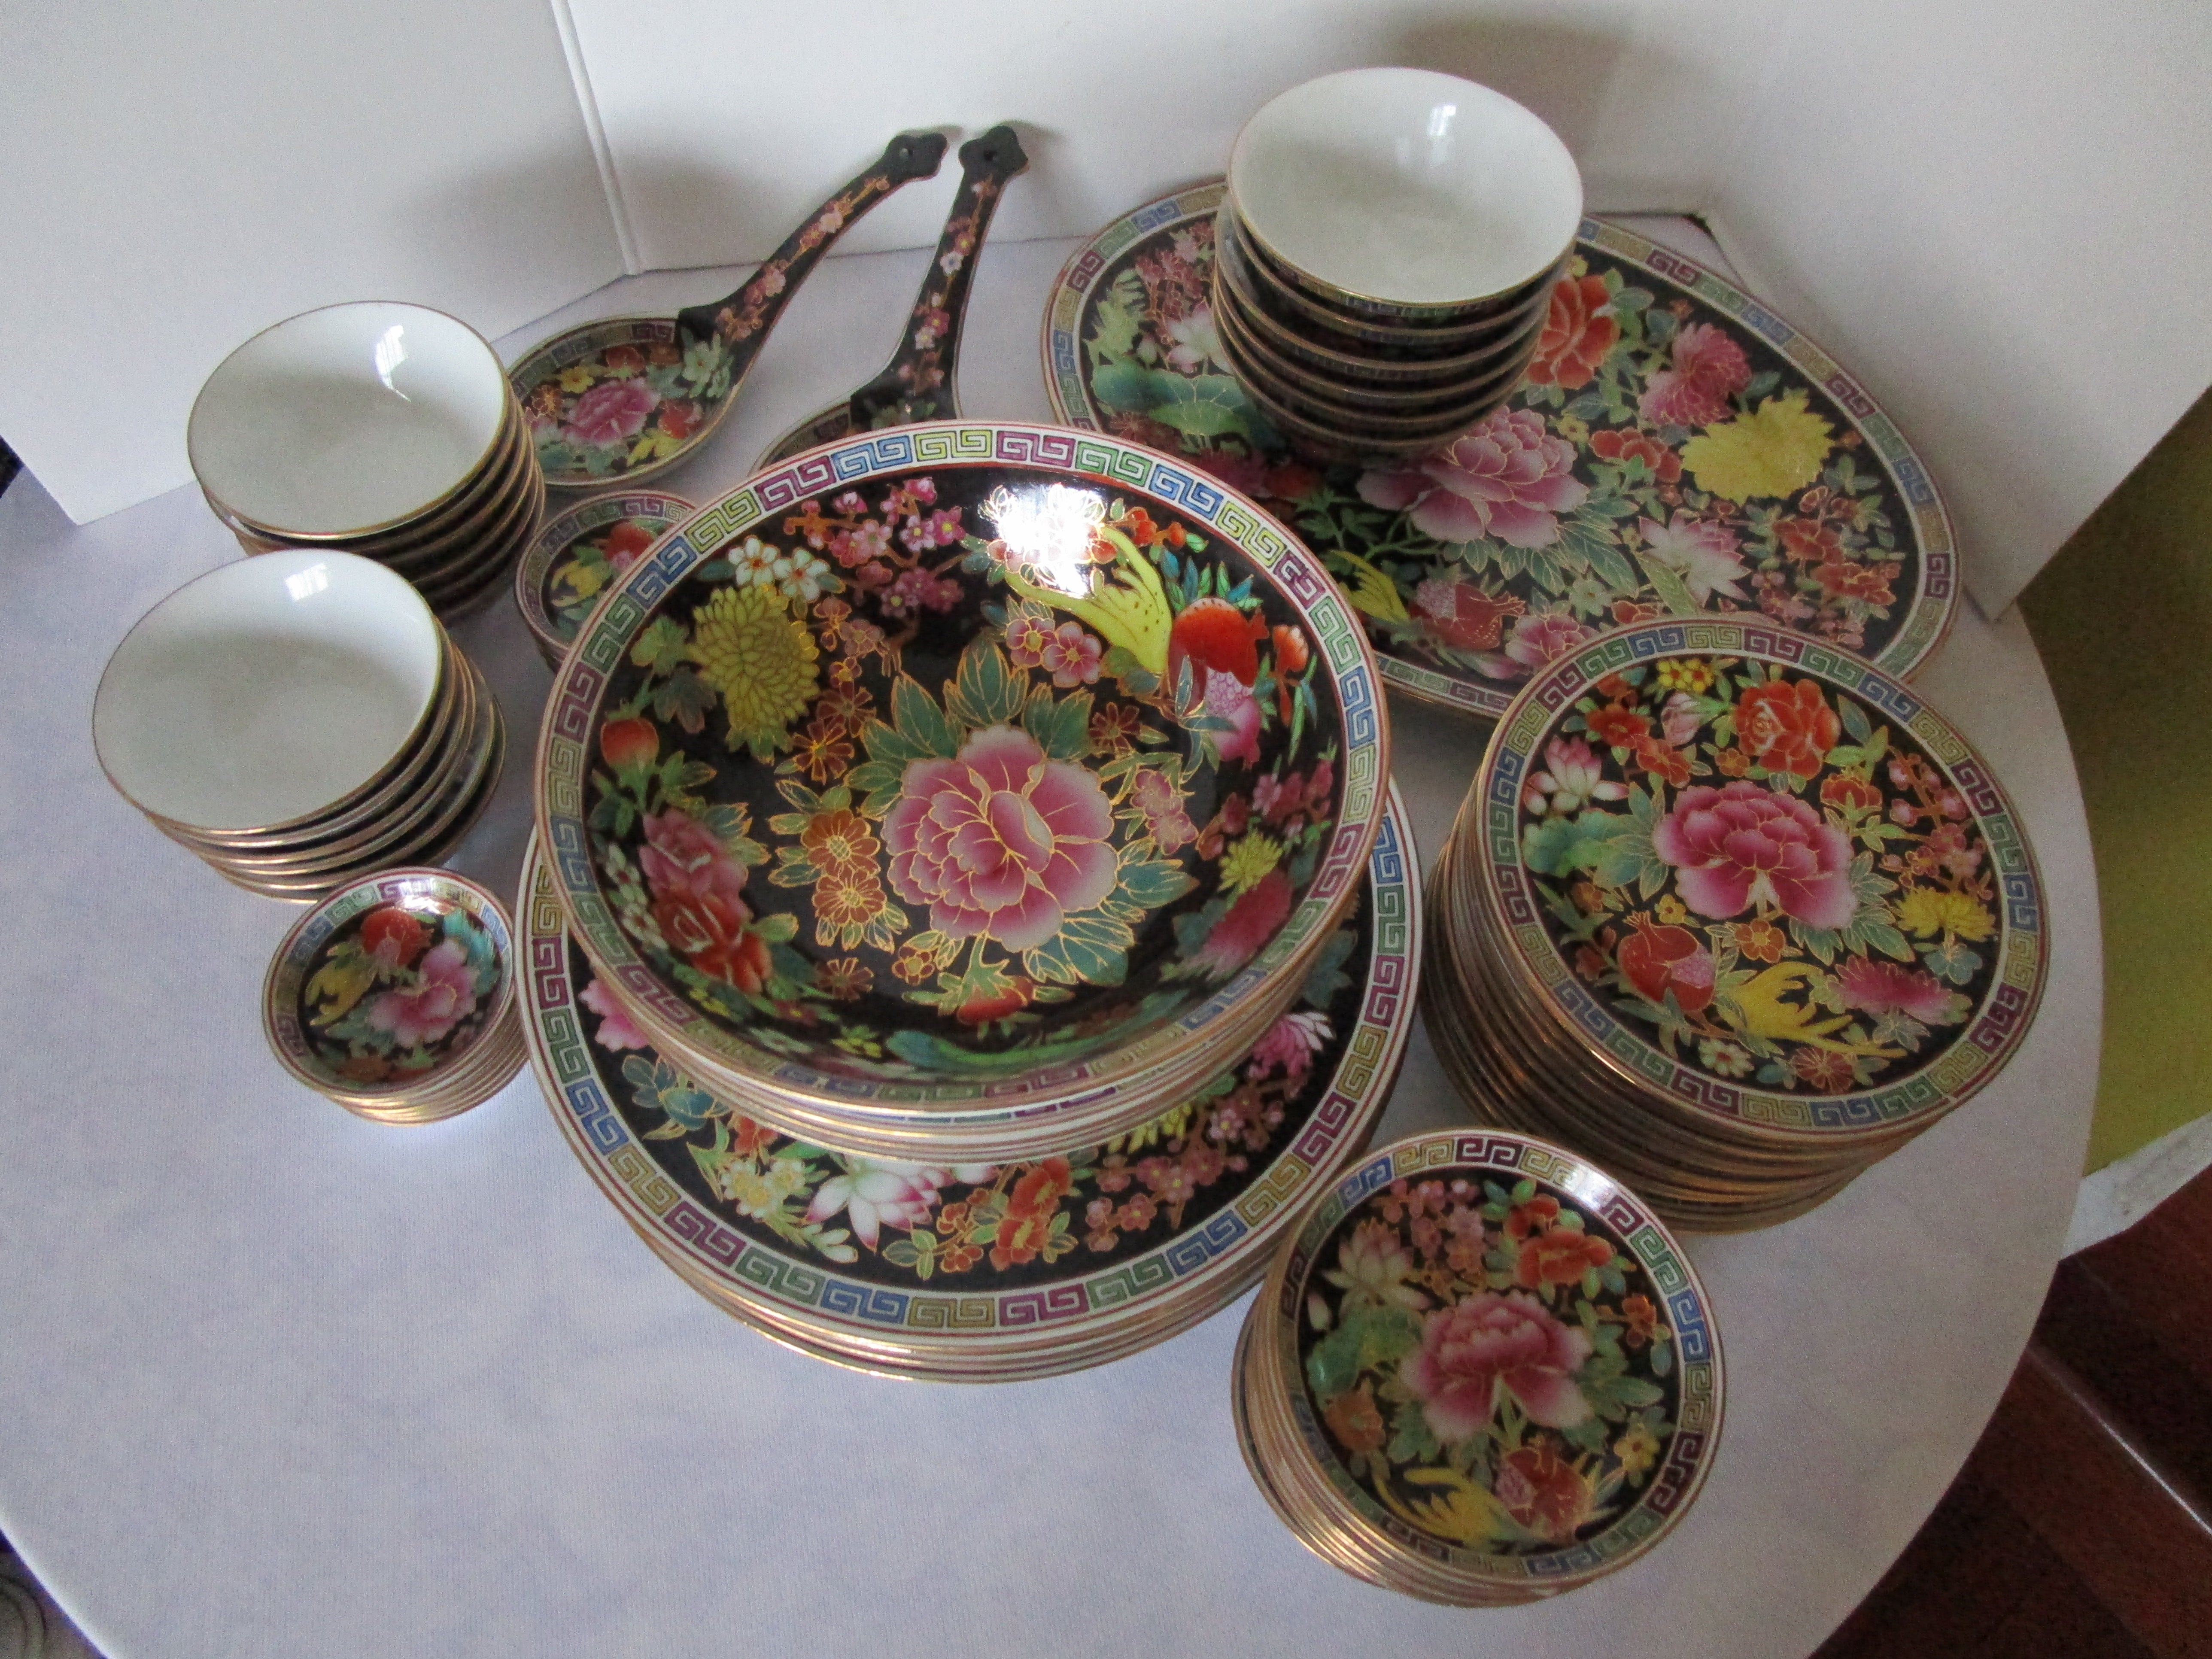 This set of assembled plates, bowls, serving items and spoons is a visual feast and a profusion of flowers on black ground and detailed gilt hand painting. The pieces are in very good condition without cracks or chips.
There are 12 bowls: 4